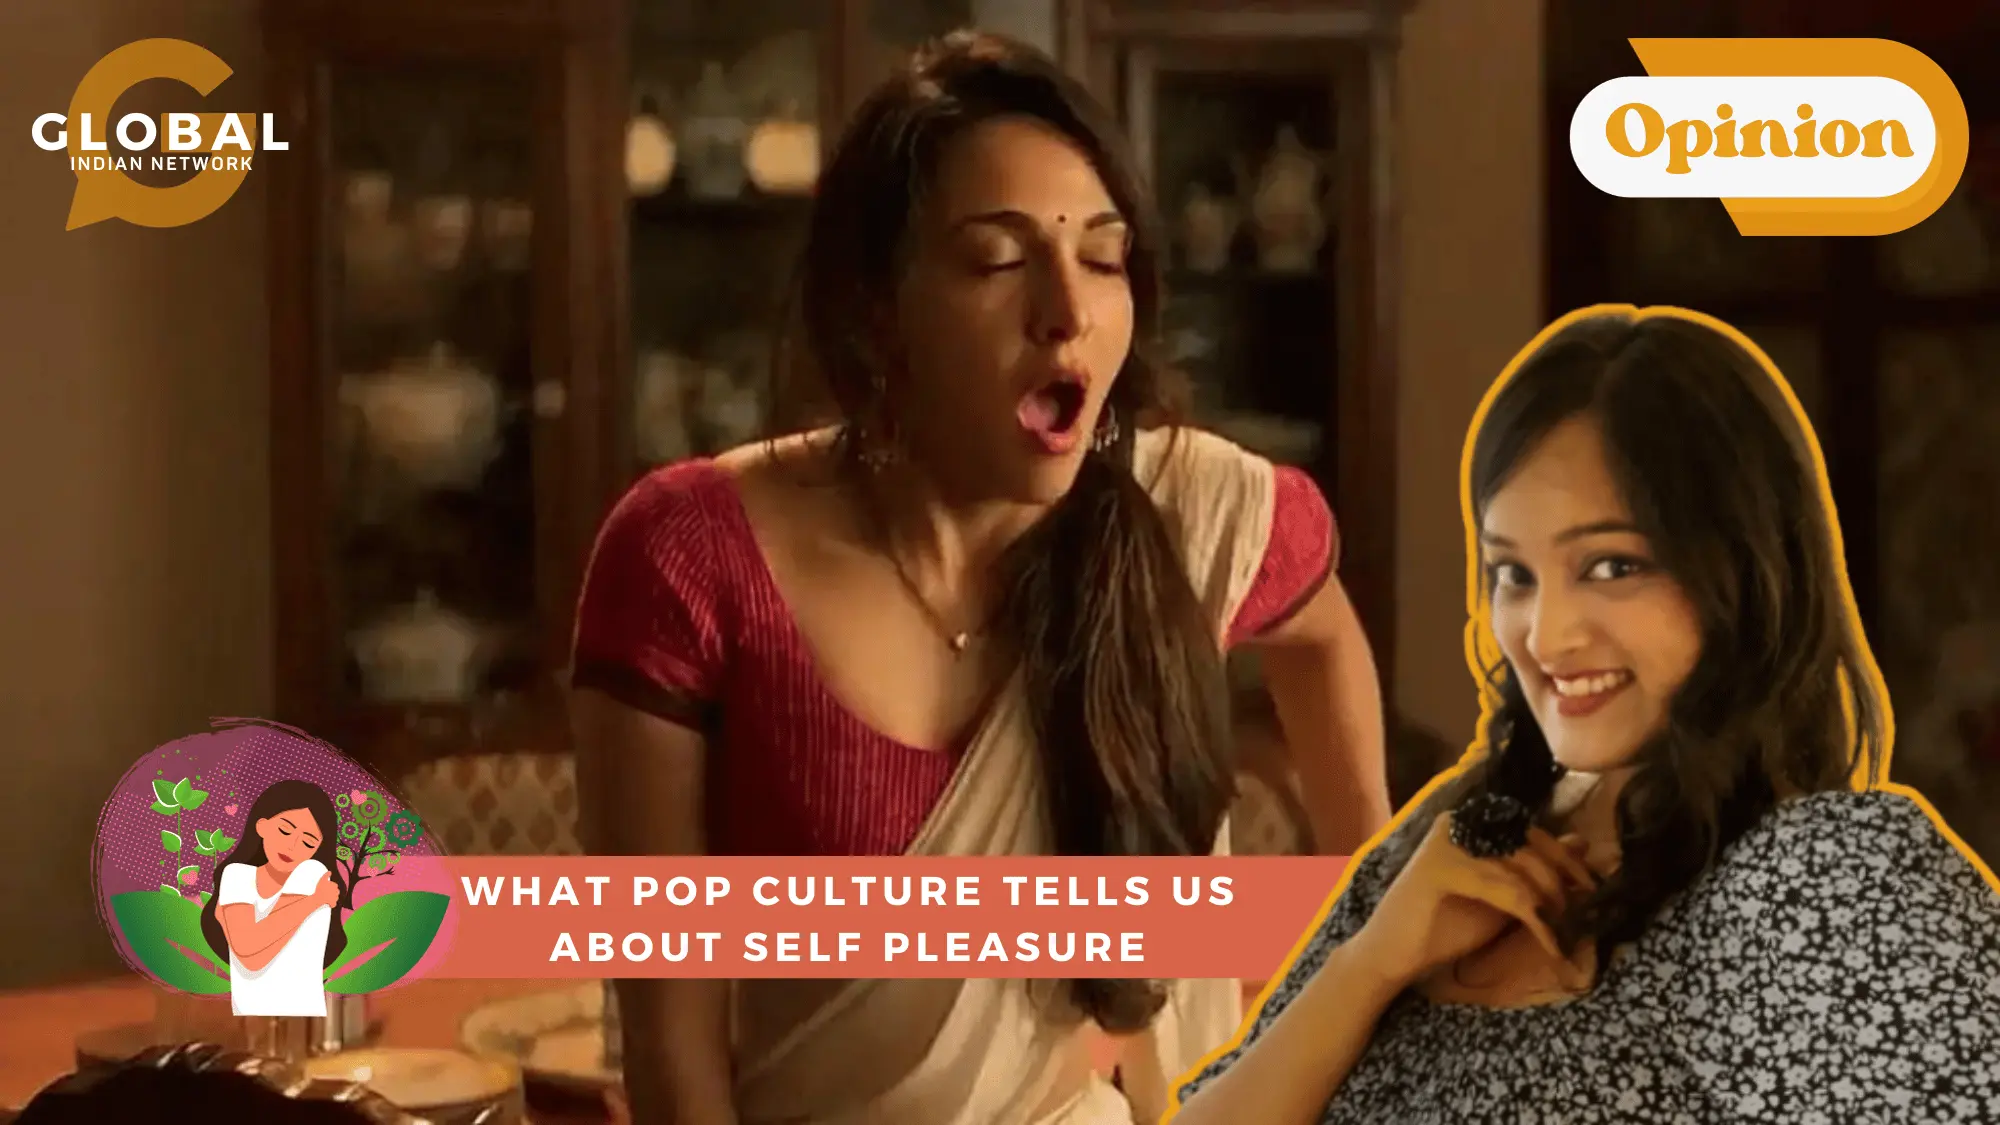 What pop culture tells us about self-pleasure - Global Indian Network